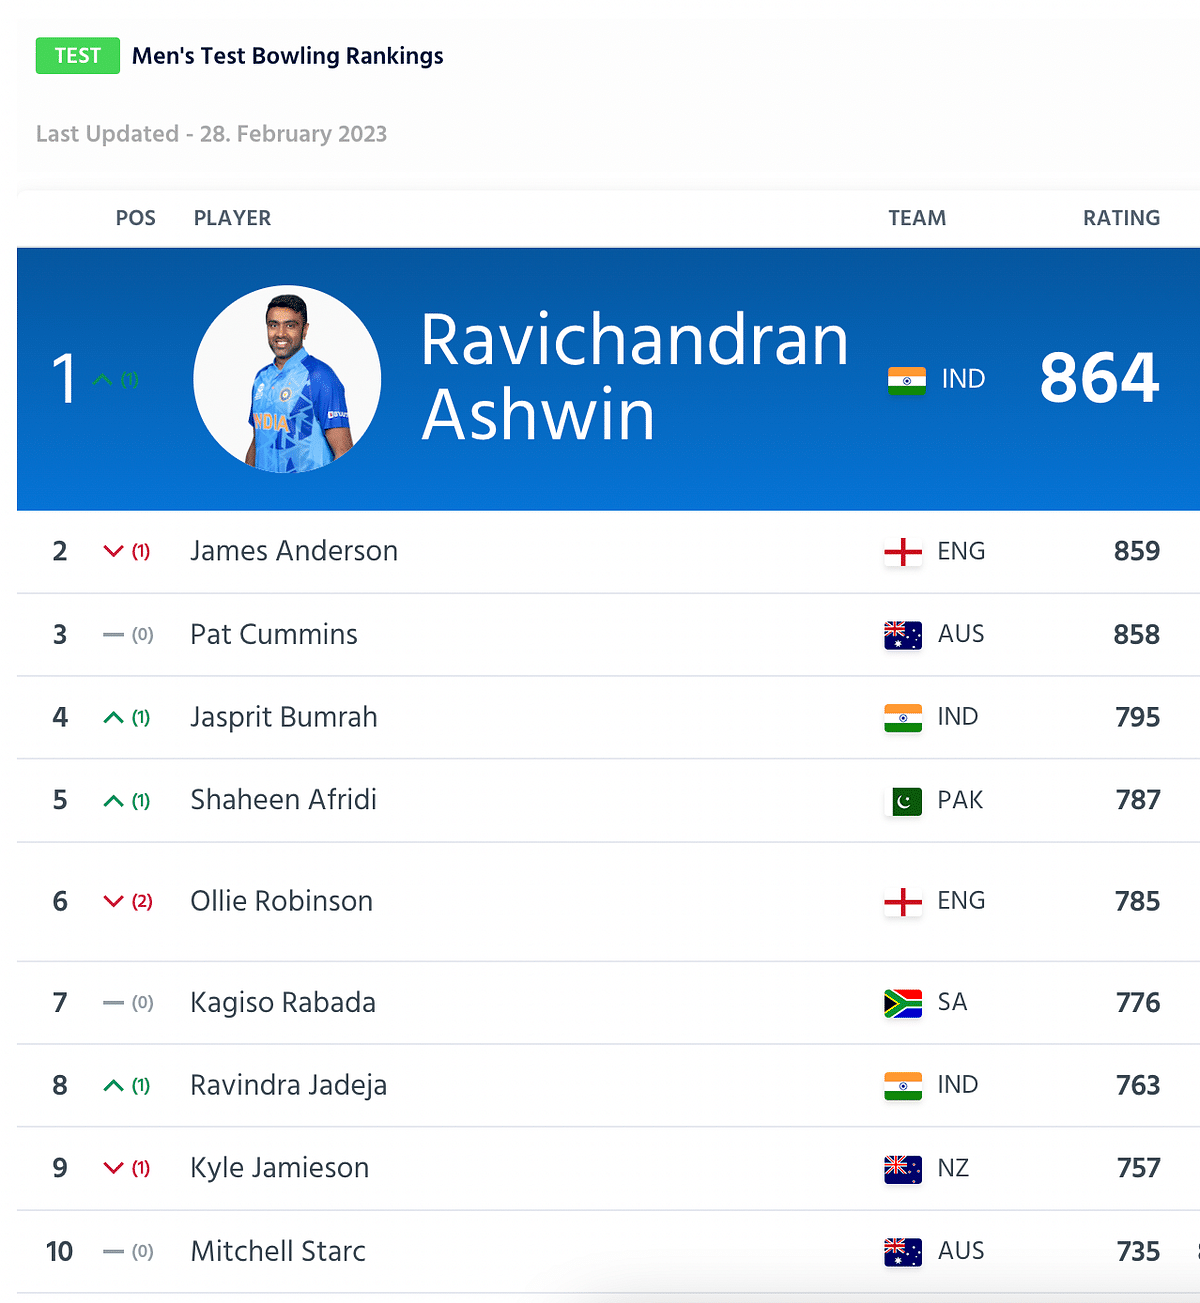 R Ashwin has beaten James Anderson to take over the number one spot in the ICC's Test bowling rankings.